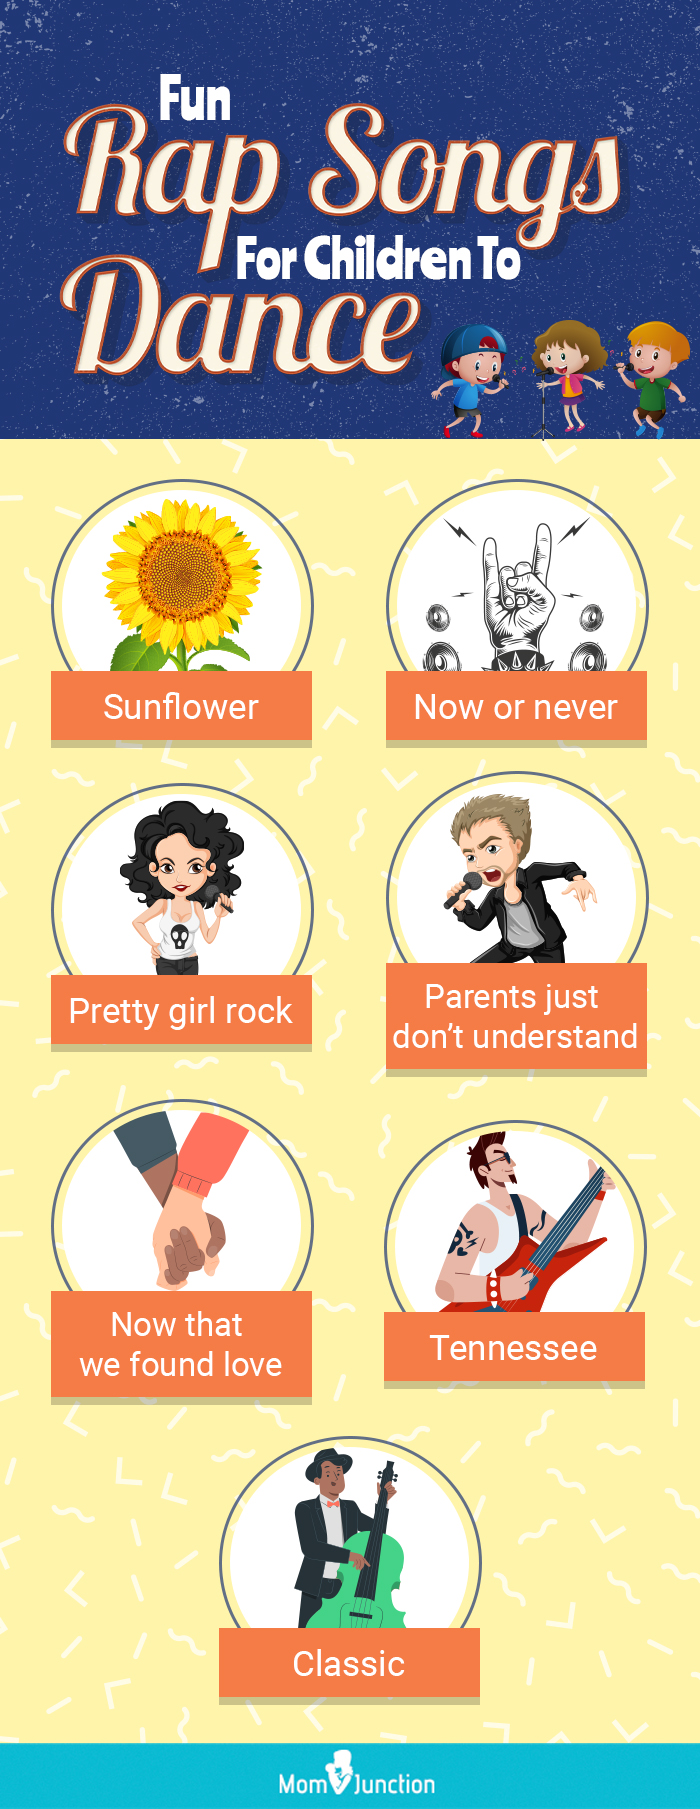 fun raps songs for children to dance (infographic)